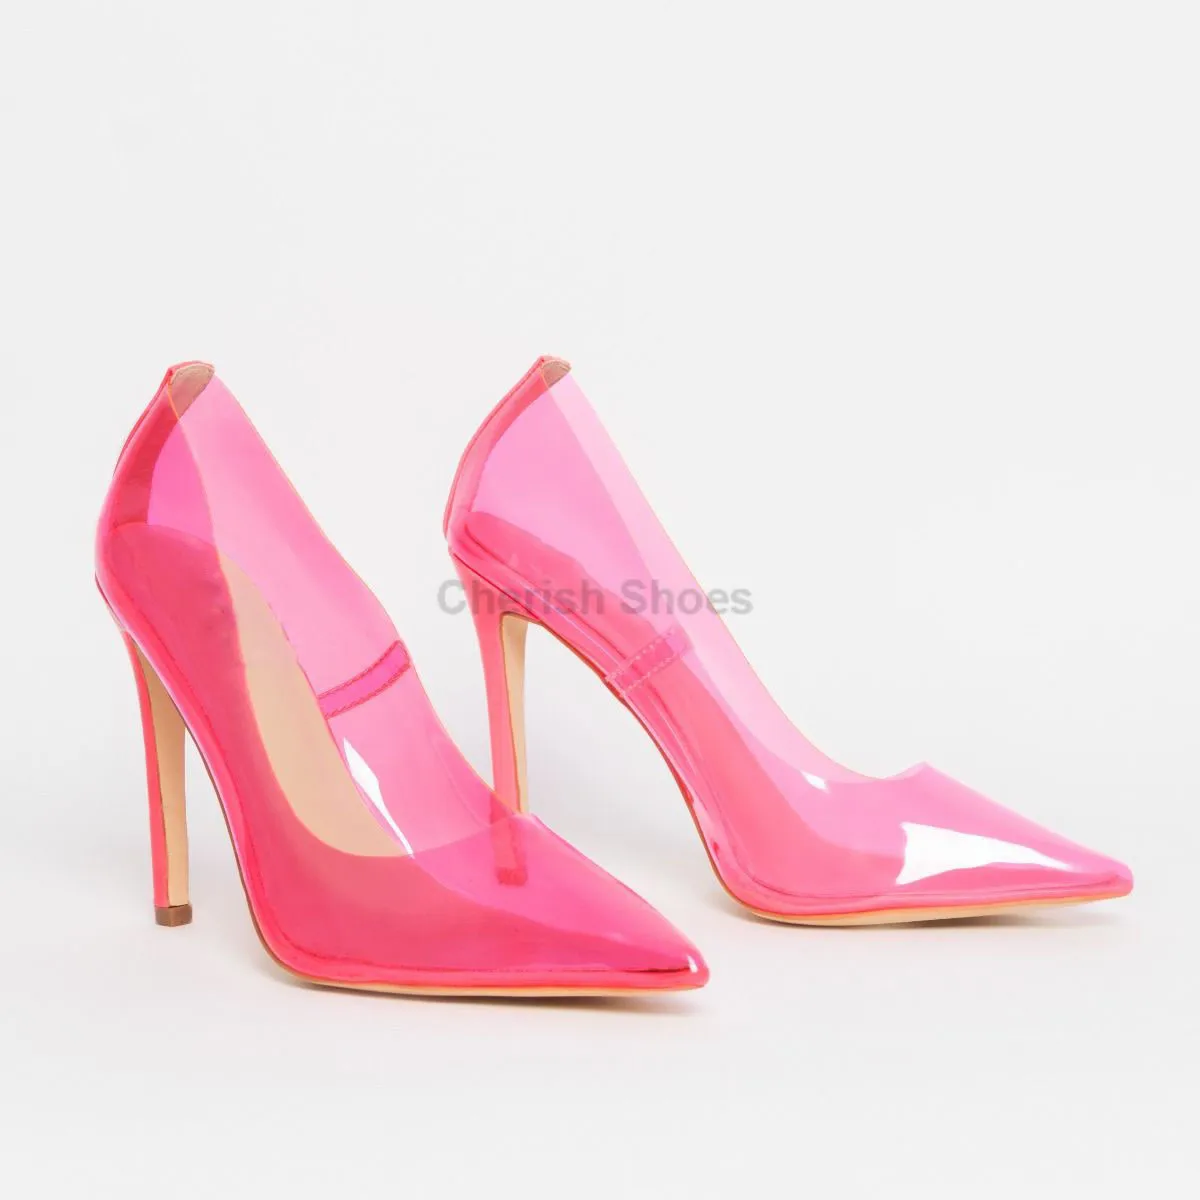 Stiletto Heels With Pointed Toe And Clear PVC Pumps In Pink, Blue, Neon  Yellow Slip On Patchwork Shallow Blush Pink Heels Wedding For Women From  Hemegot, $74.38 | DHgate.Com